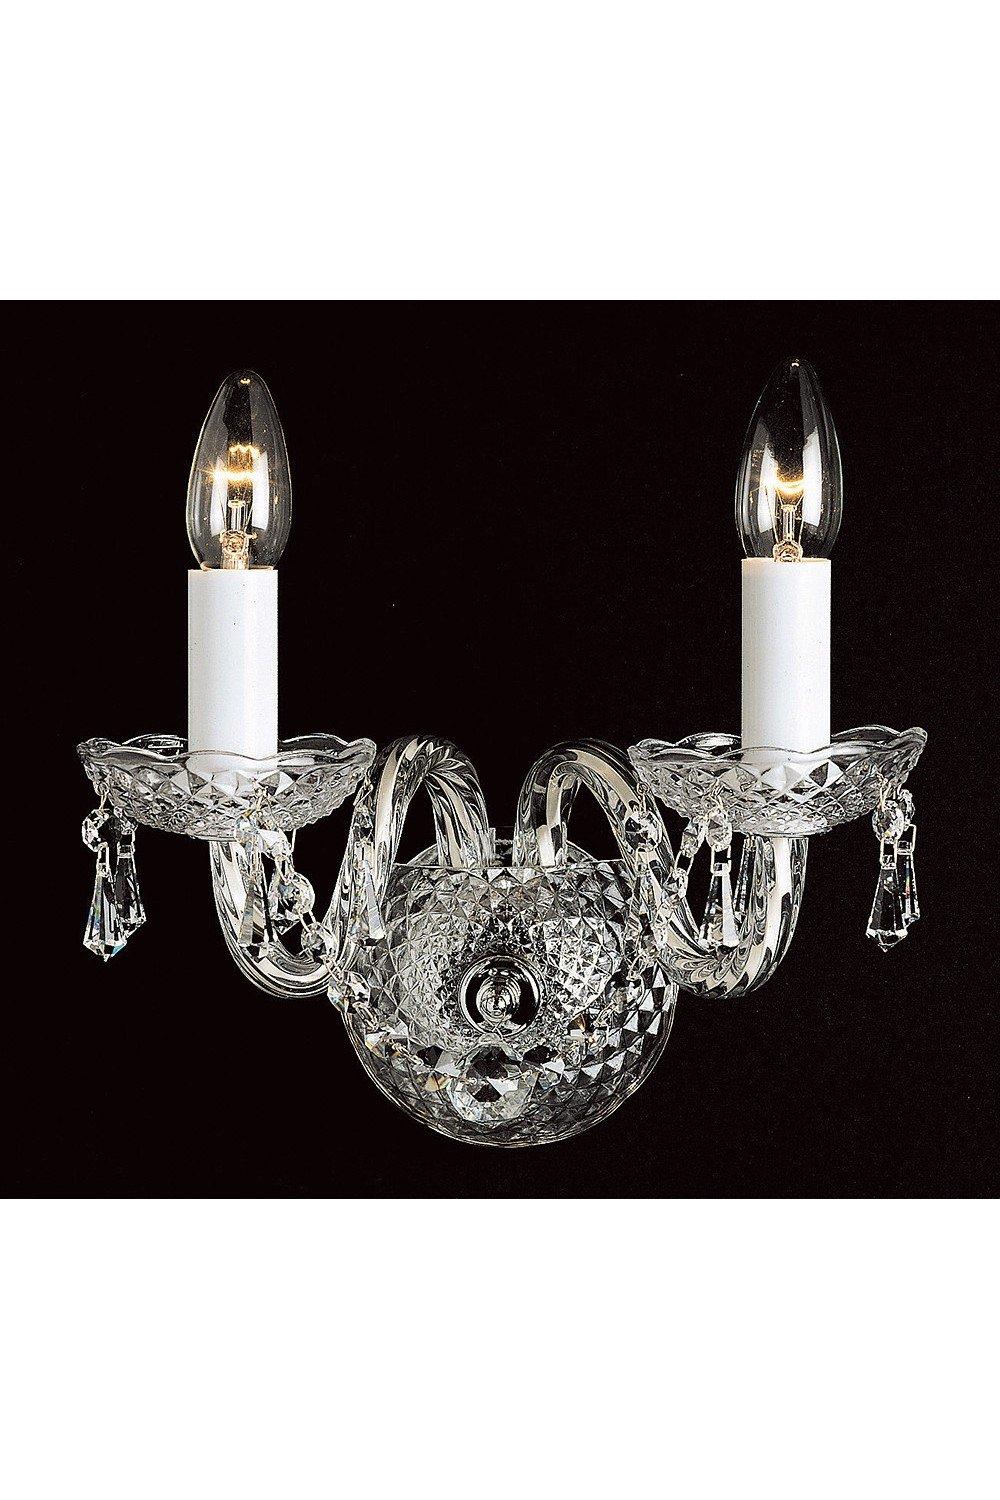 Modra Crystal Trimmed Wall Candle Wall Lamp